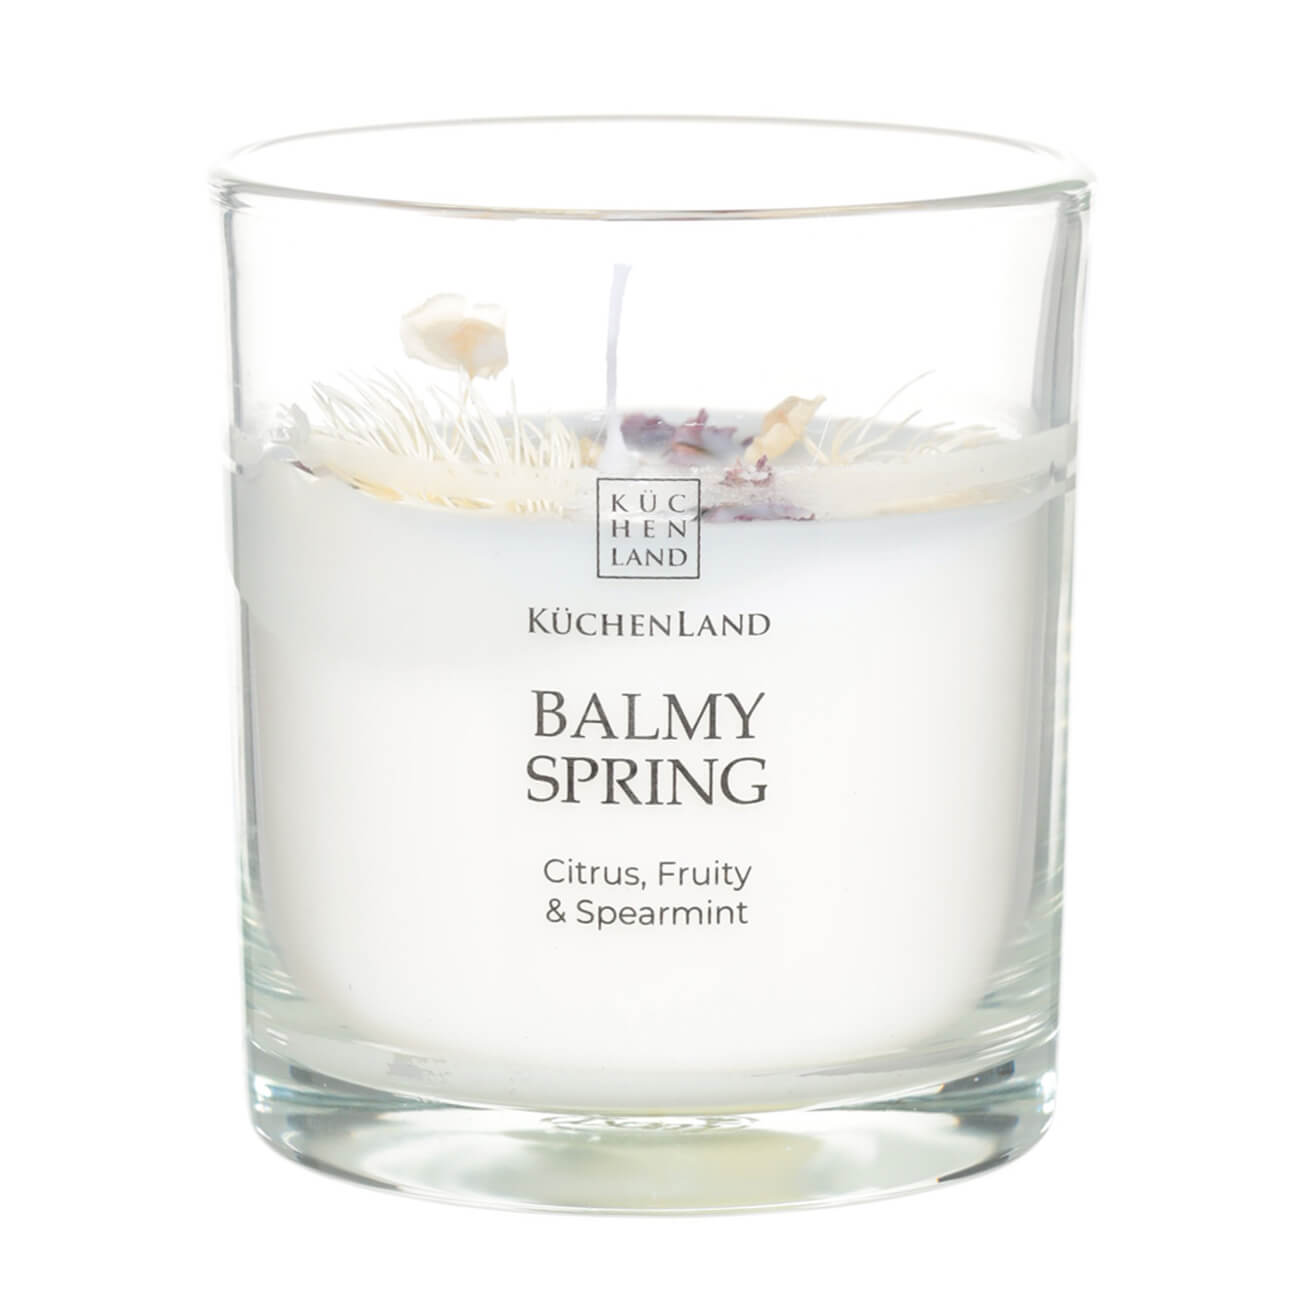 Scented candle, 9 cm, in a candle holder, with dried flowers, Citrus, Fruity & Spearmint, Balmy spring изображение № 1